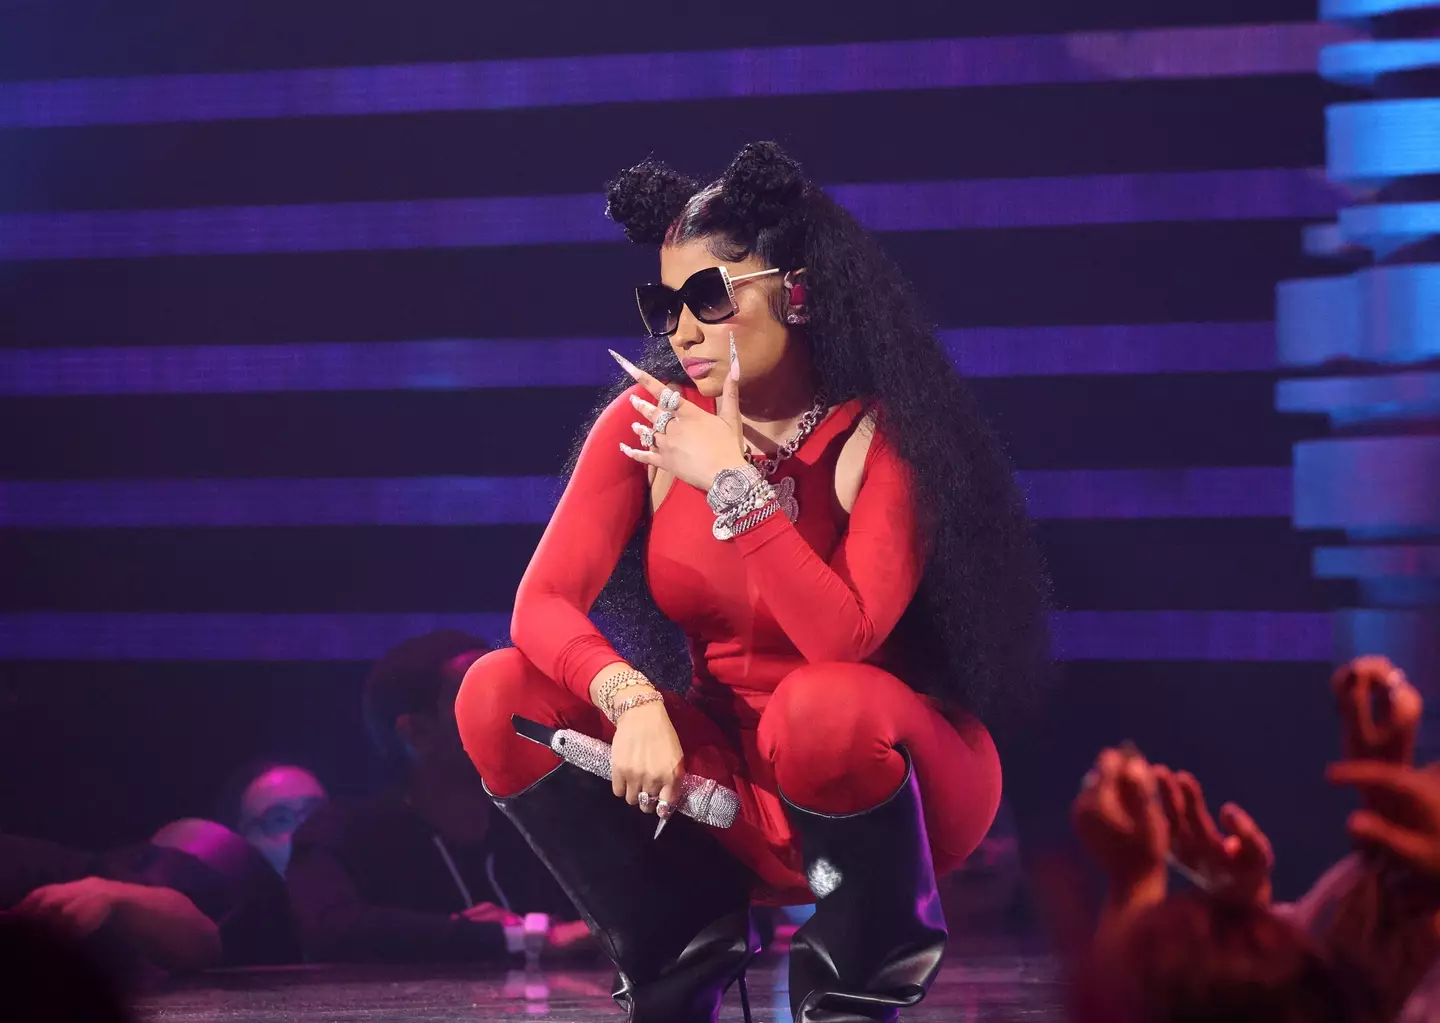 Nicki Minaj couldn't make her show as she'd been arrested in Amsterdam. (Mike Coppola/Getty Images for MTV)